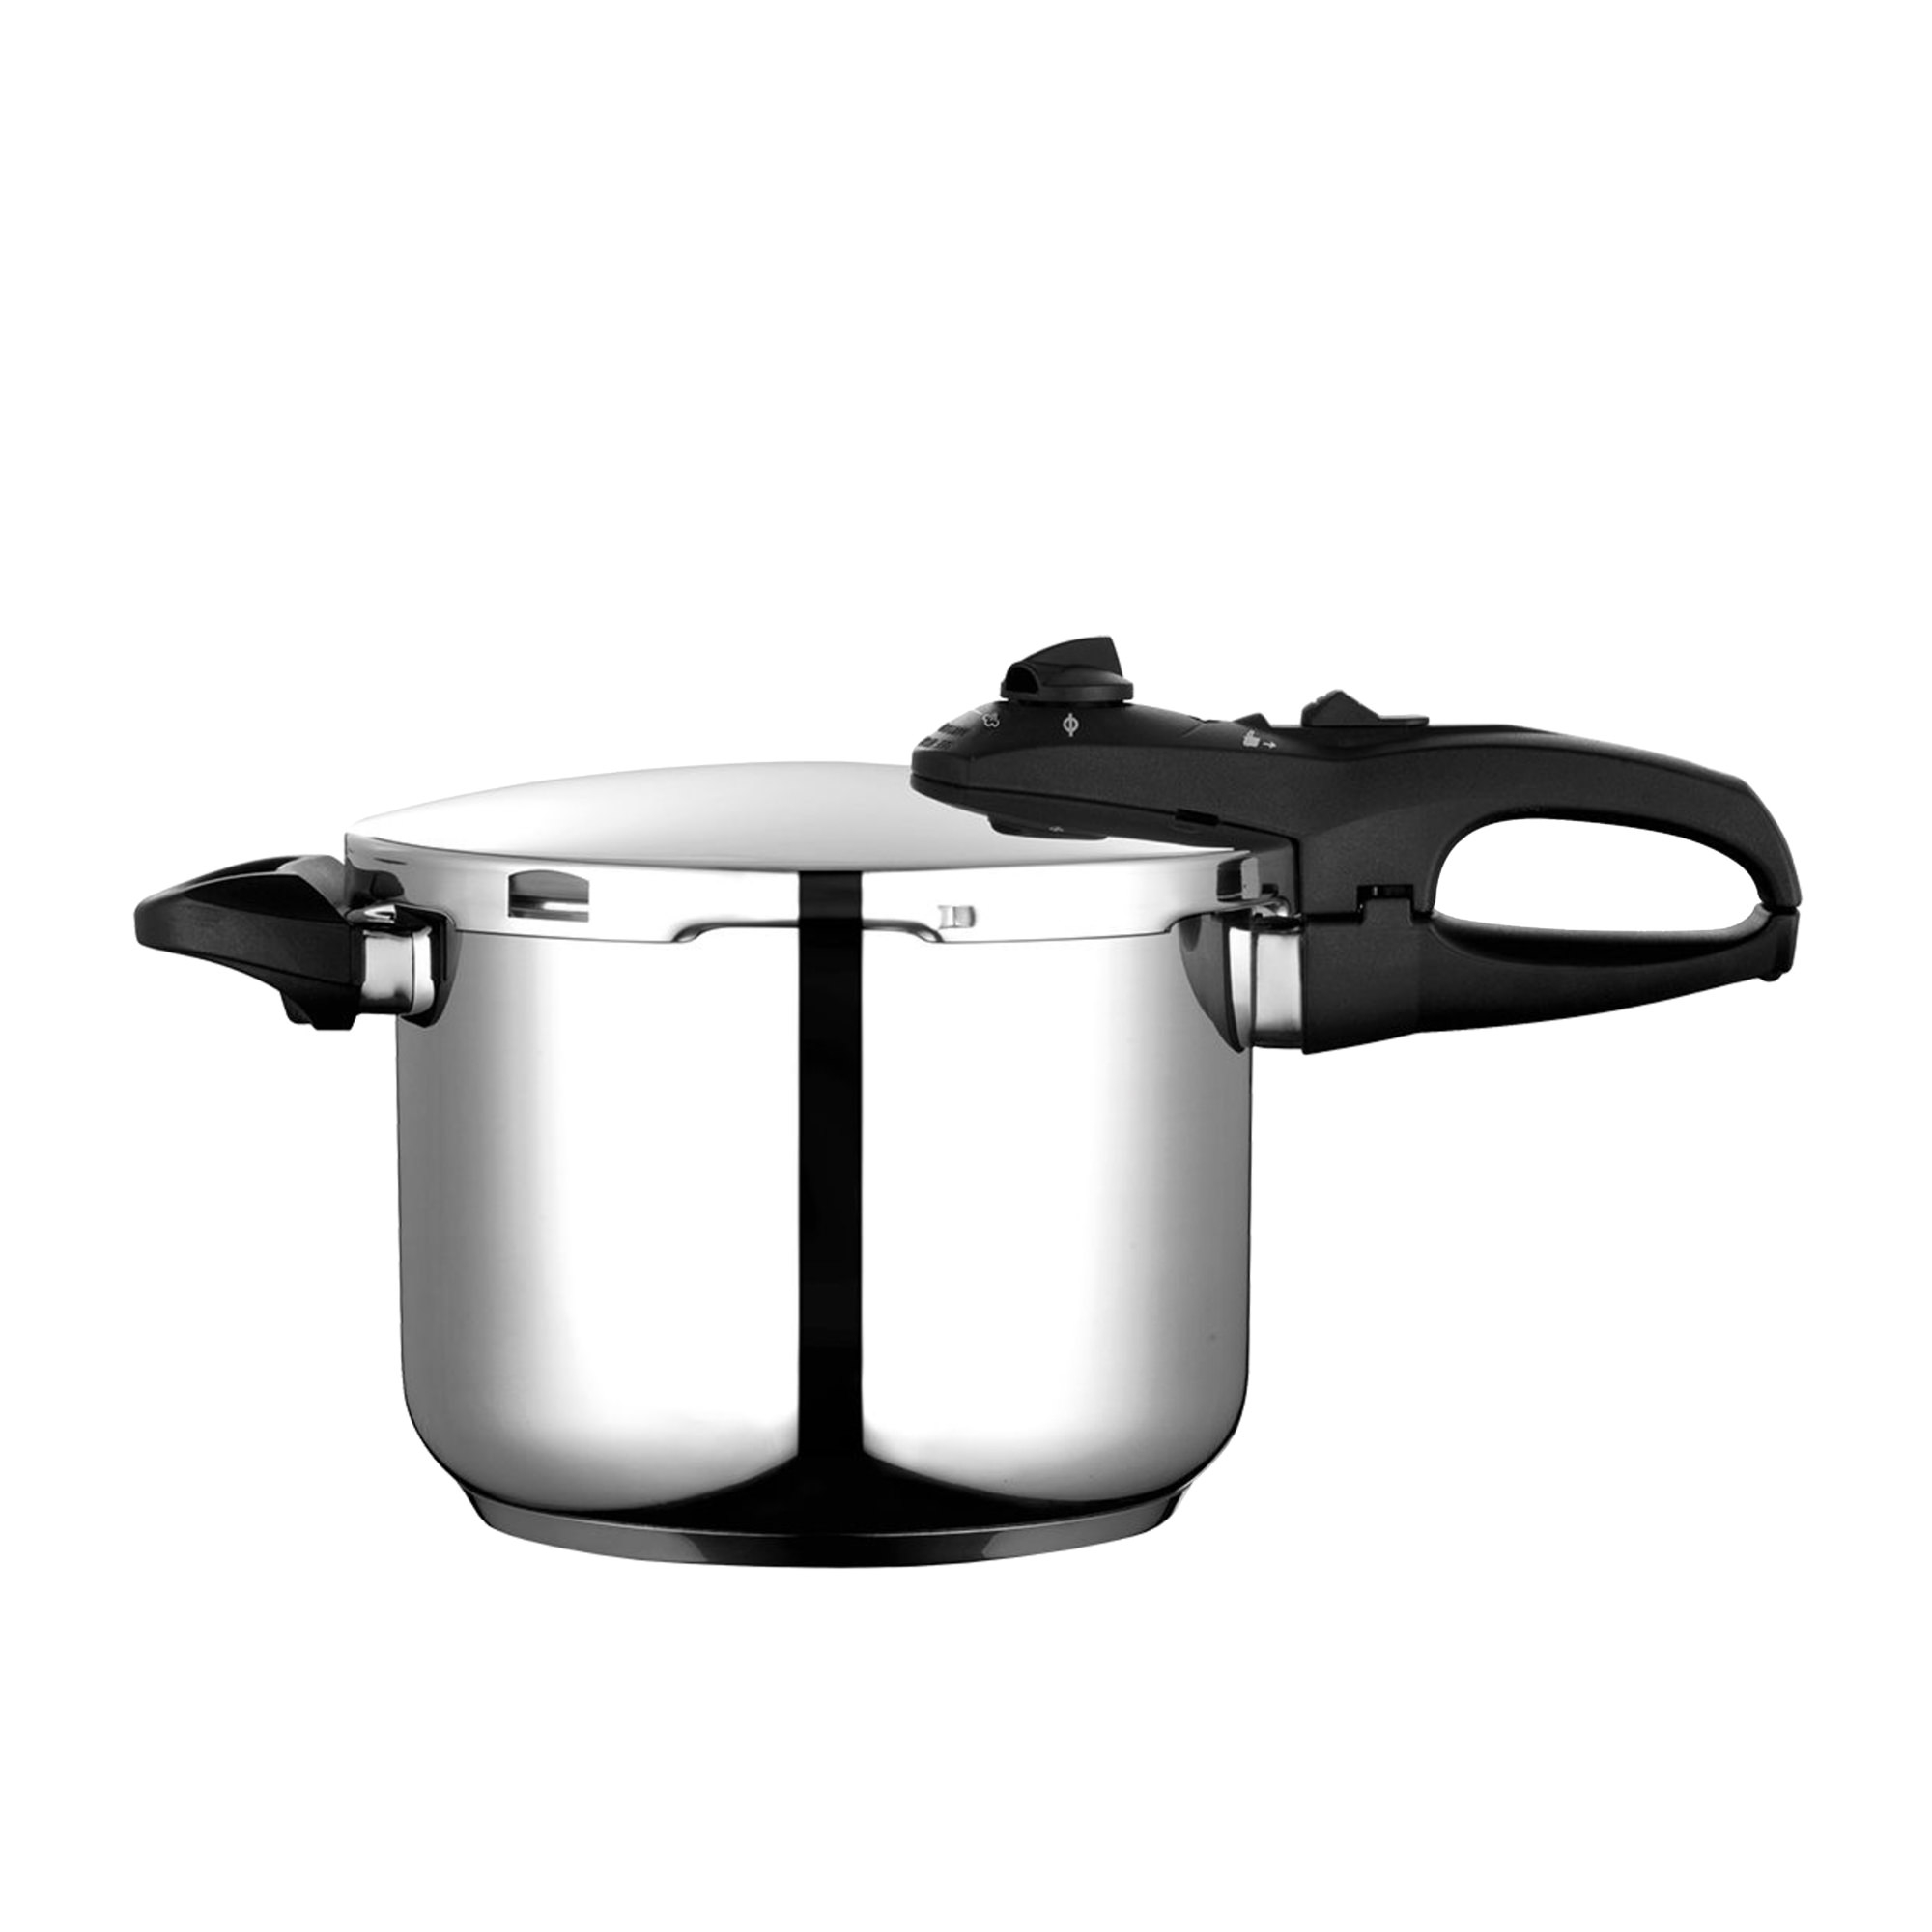 Fagor Duo Stainless Steel Pressure Cooker 6L Image 1